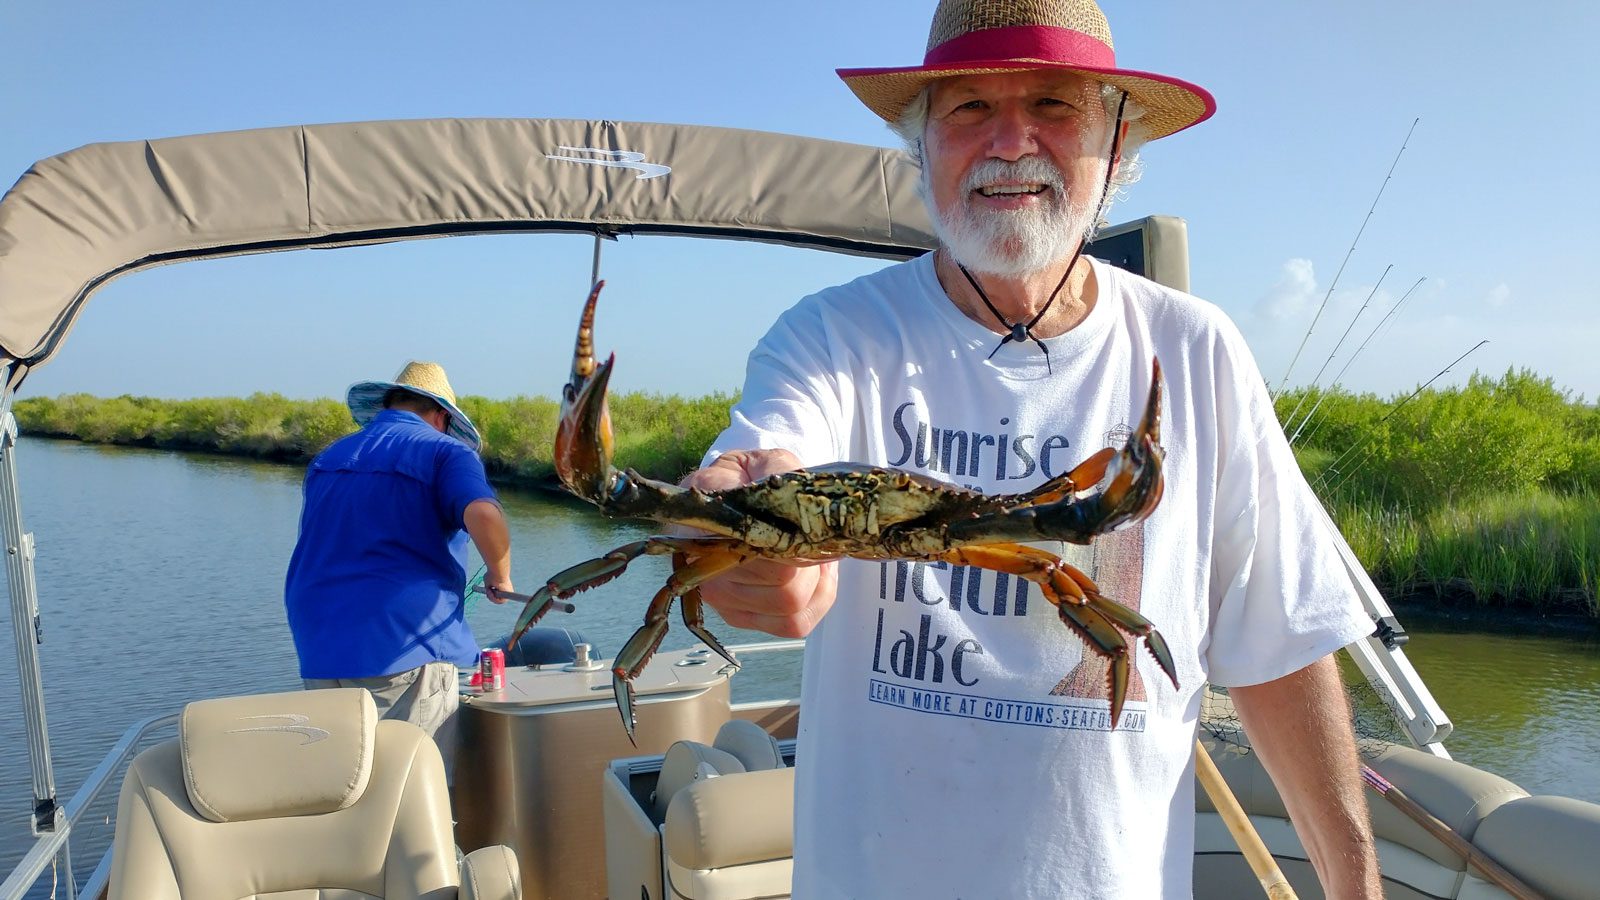 jim labove showing off his crab catch on keith lake in port arthur texas